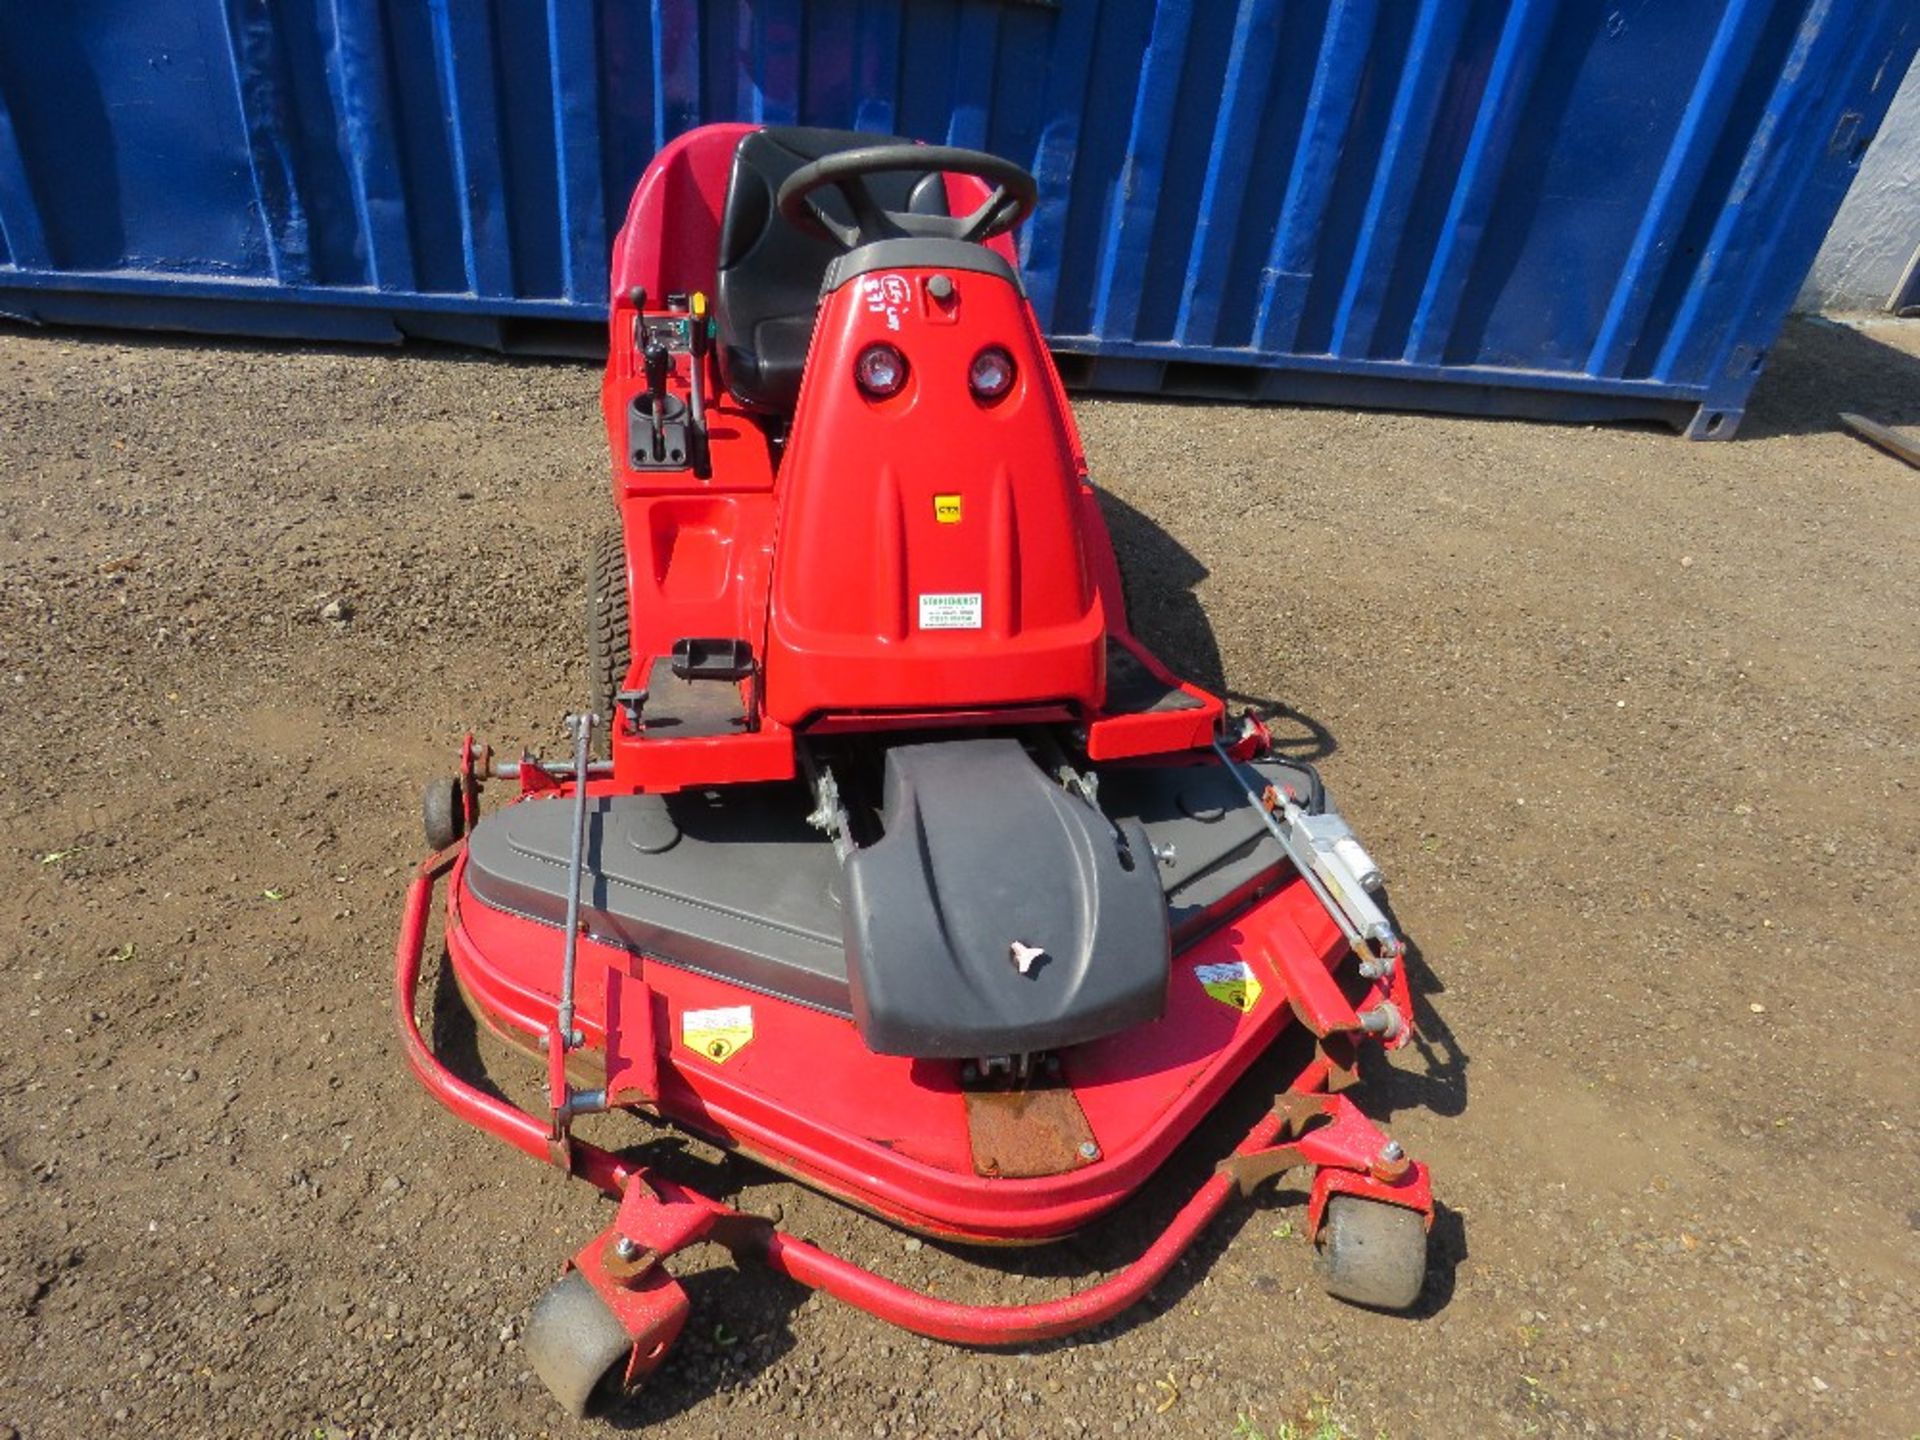 COUNTAX 4WD RIDE ON MOWER WITH OUTFRONT DECK, 394 REC HOURS, 25HP ENGINE. FINE ELECTRIC ADJUSTMENT O - Image 3 of 7